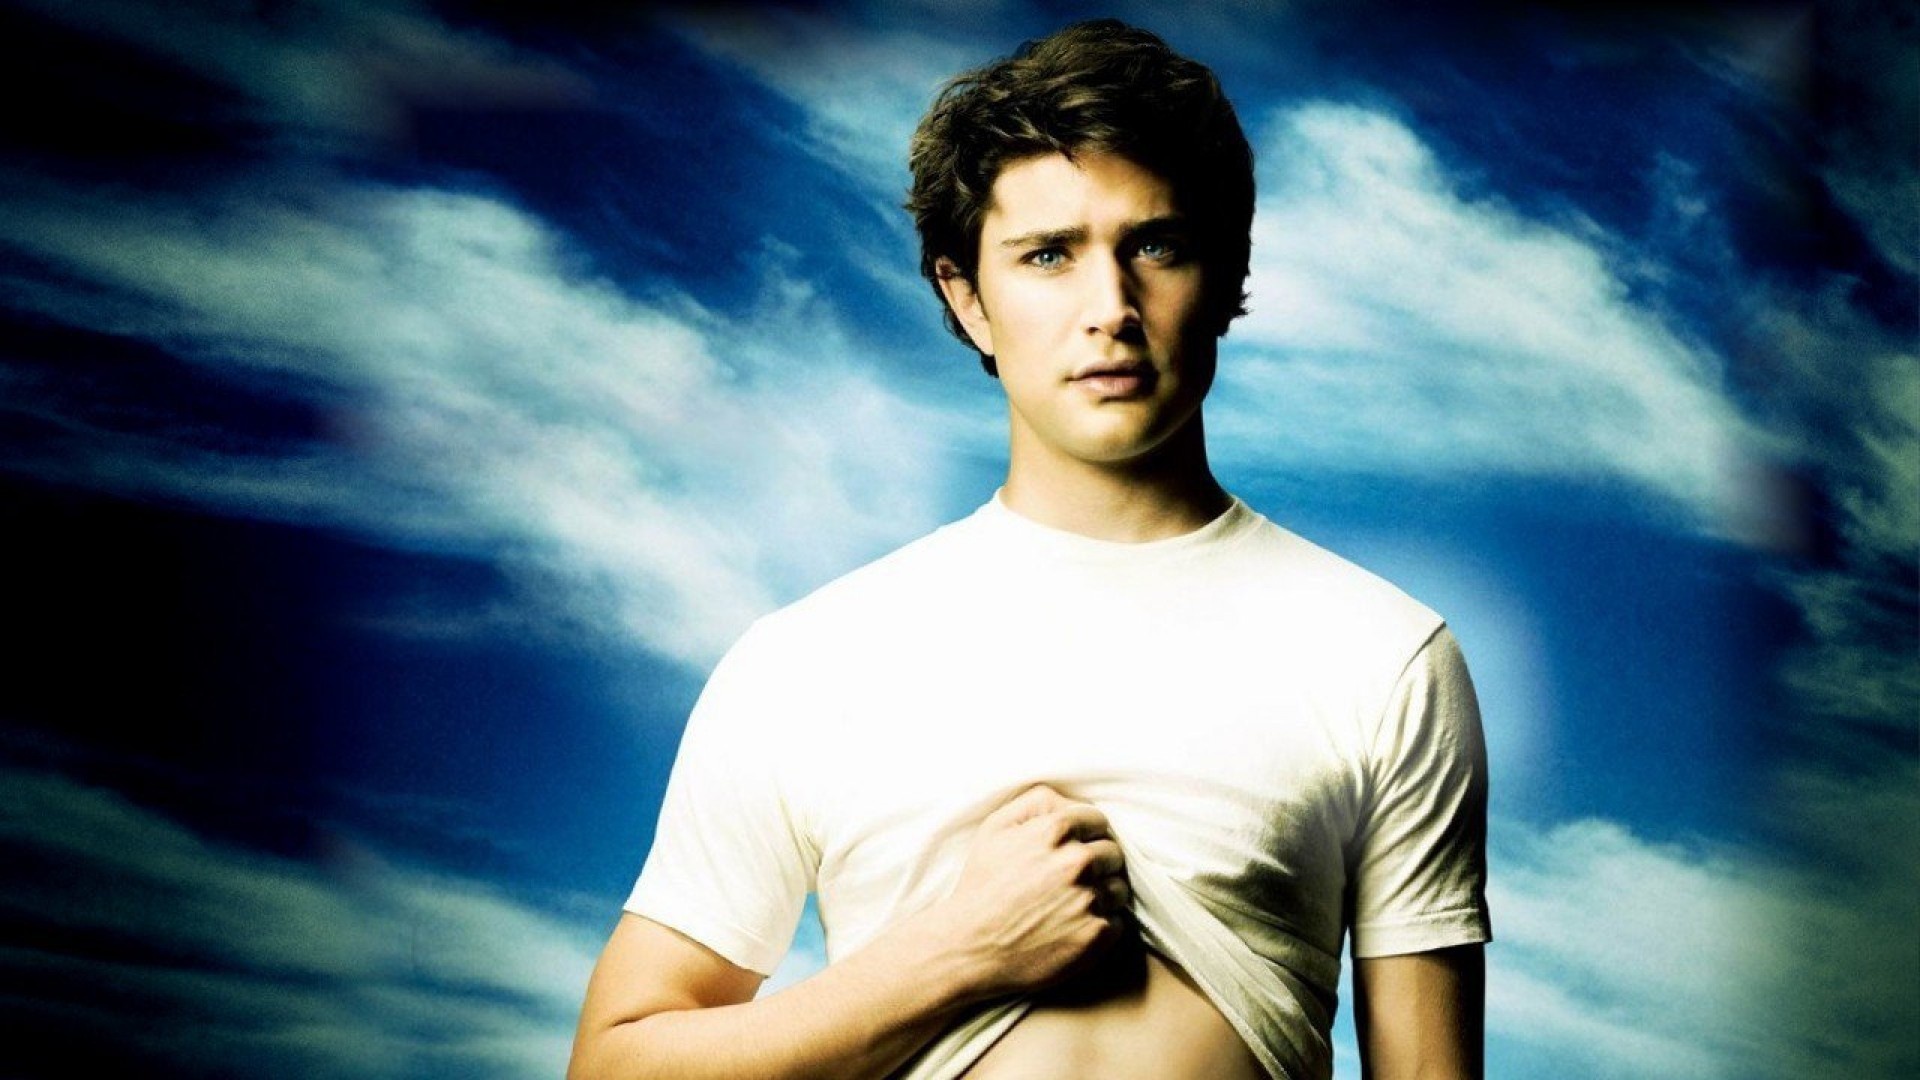 Kyle XY (TV Series): Season 2, Episode 16, Great Expectations, The protagonist, His experiment name is "781227". 1920x1080 Full HD Background.